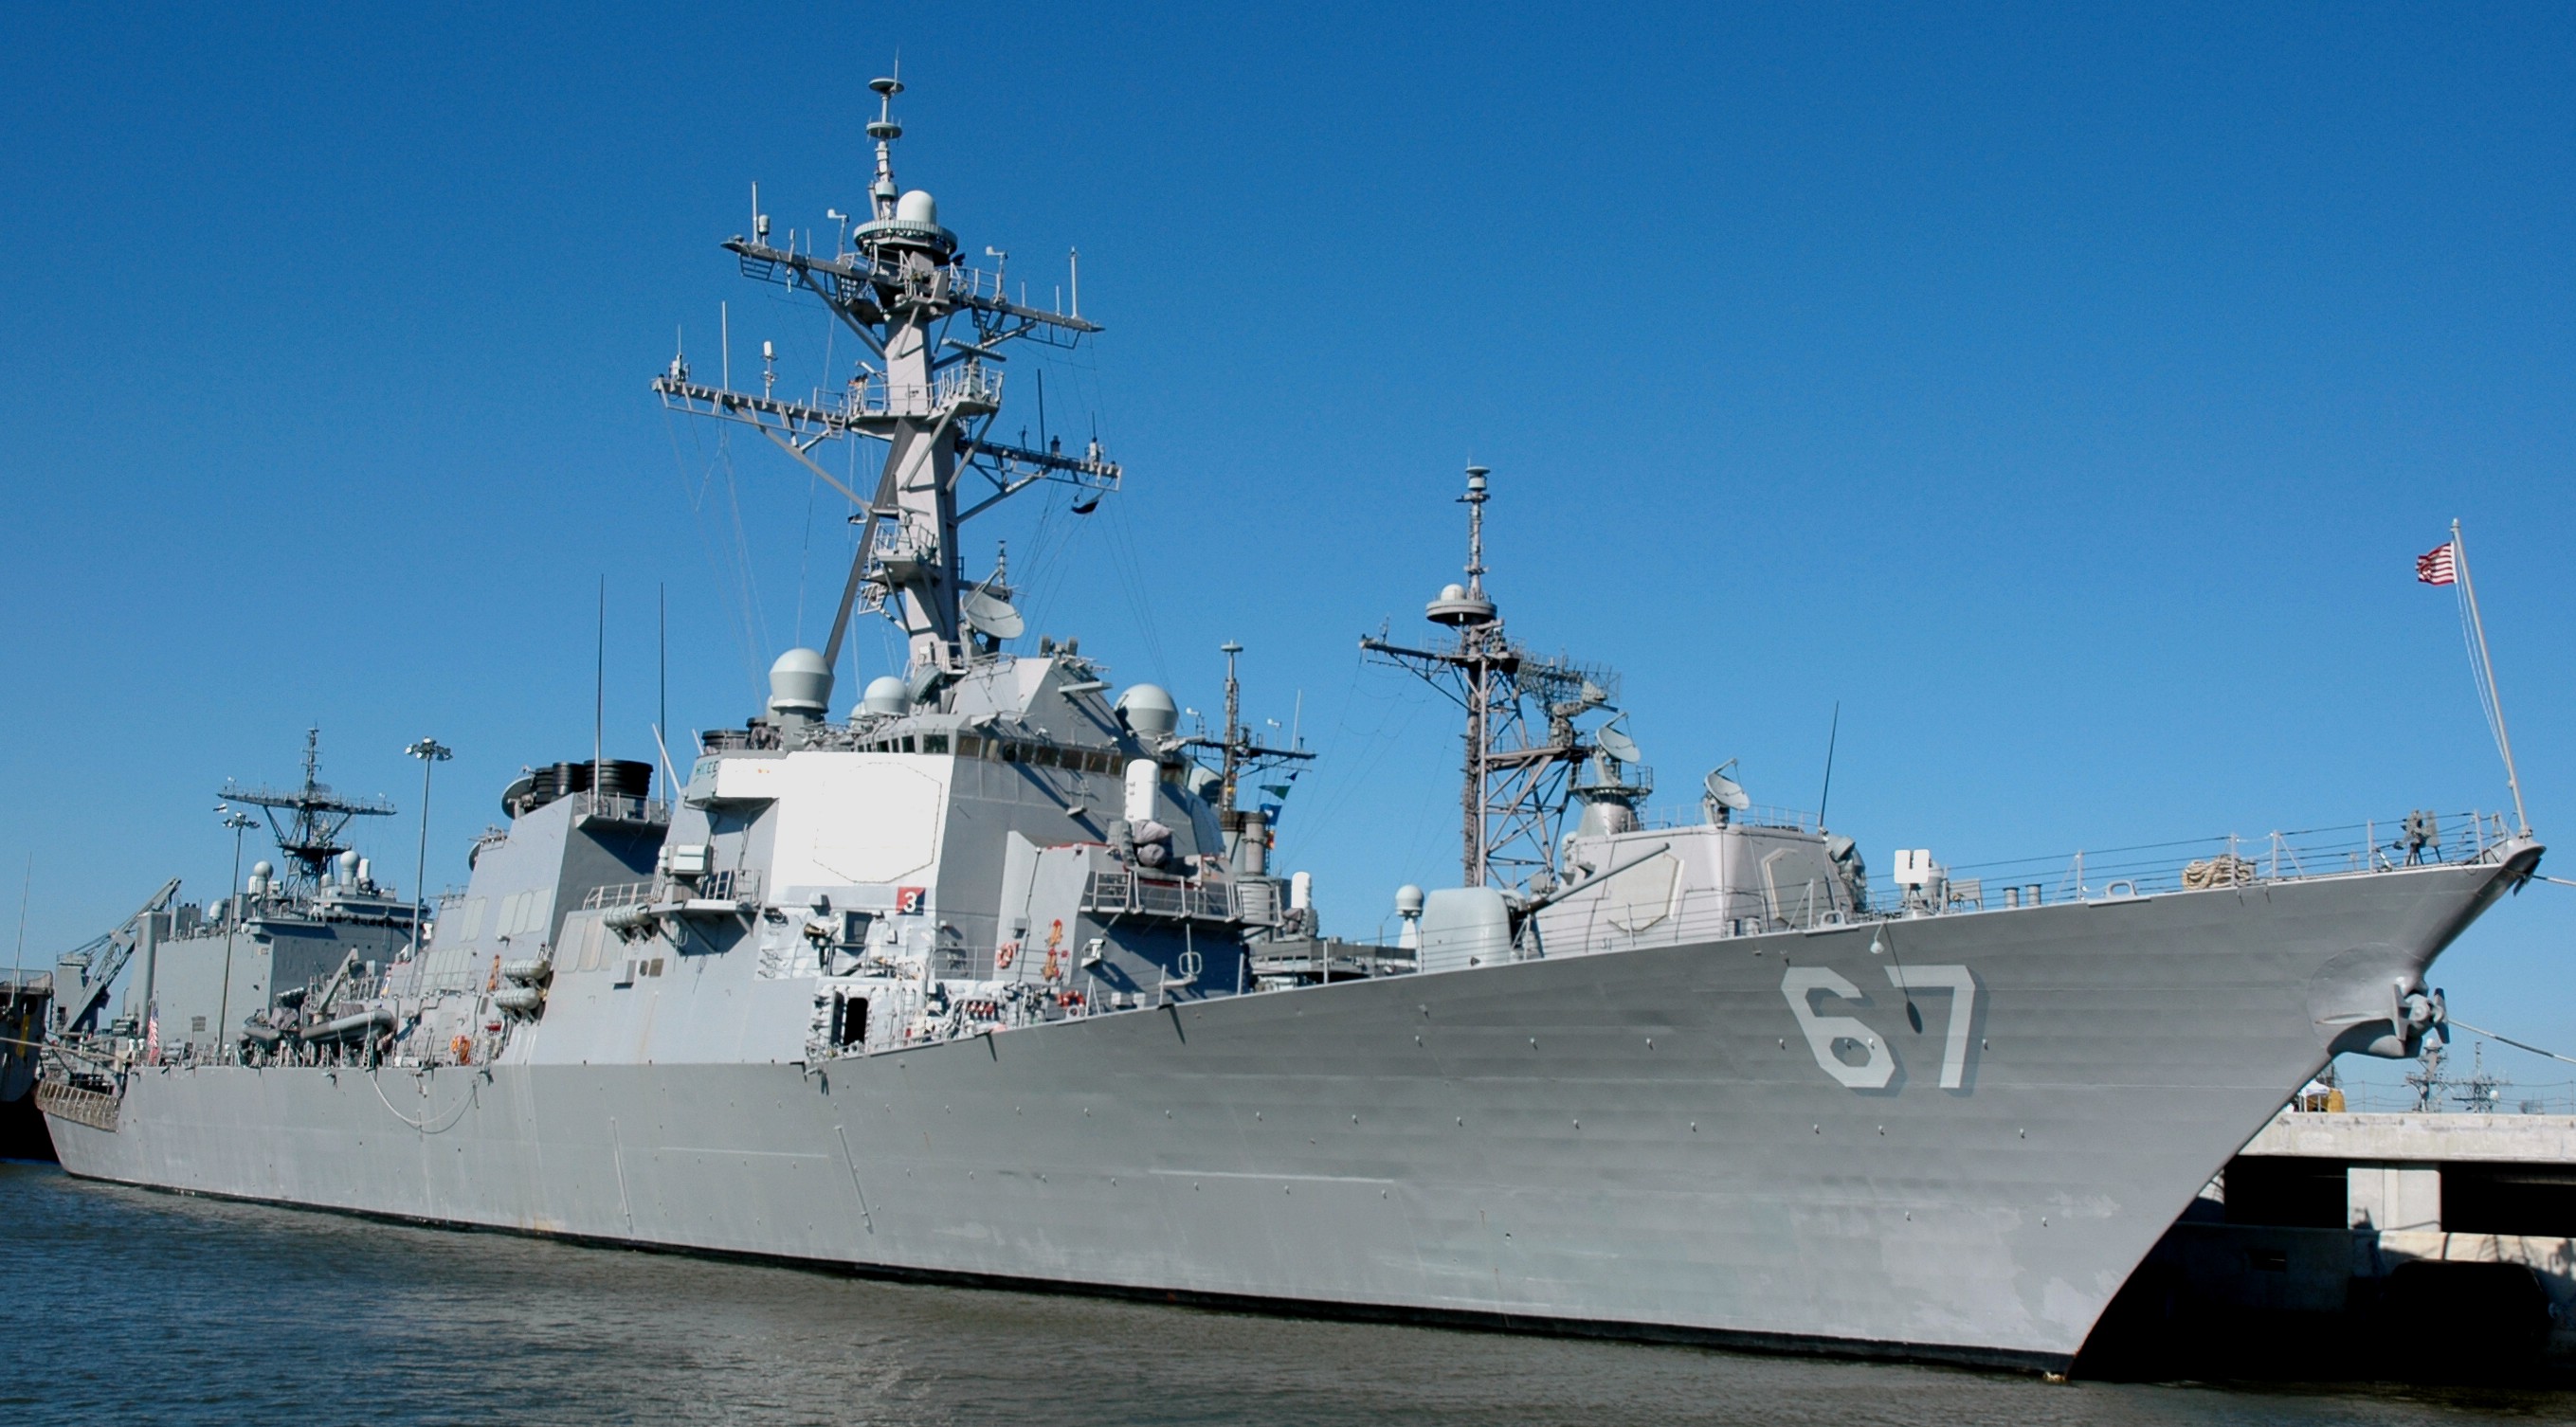 ddg-67 uss cole guided missile destroyer arleigh burke class navy aegis 36